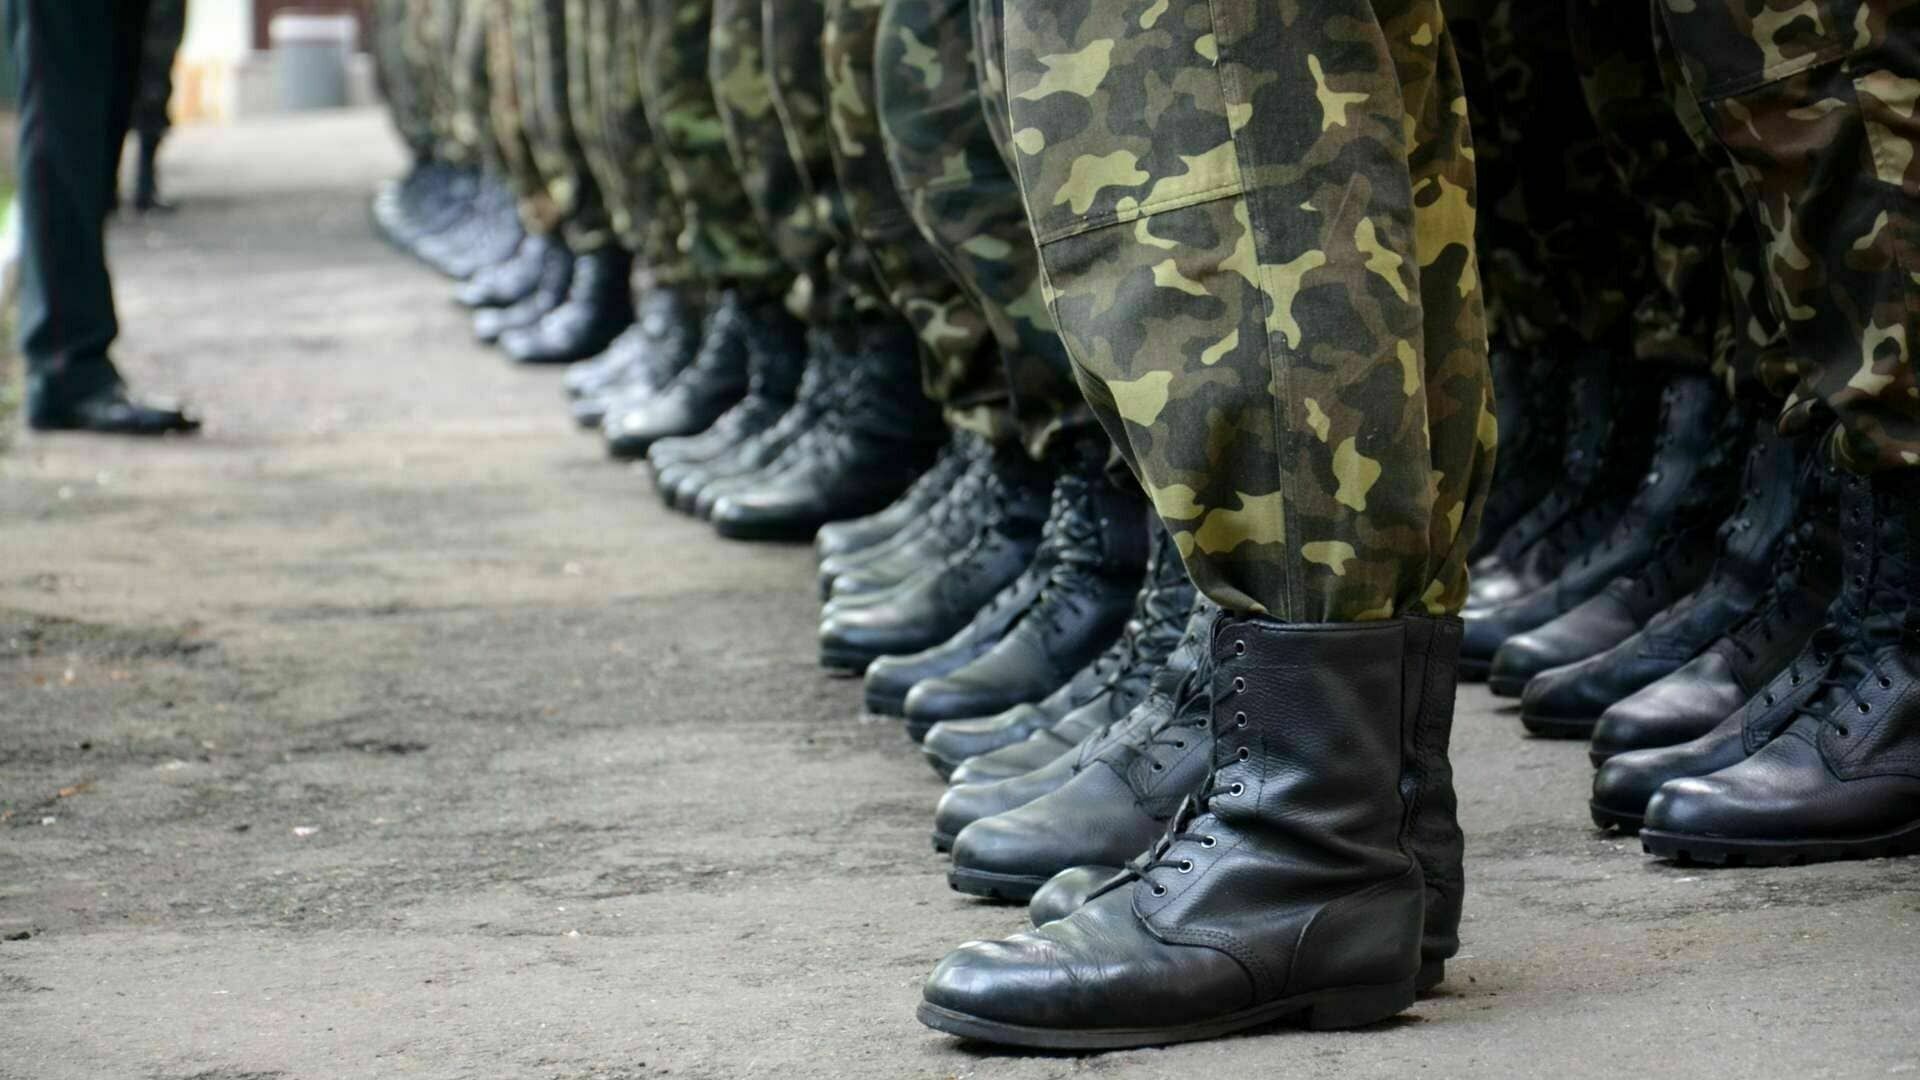 Ukraine has sharply increased its rating among the strongest armies in the world